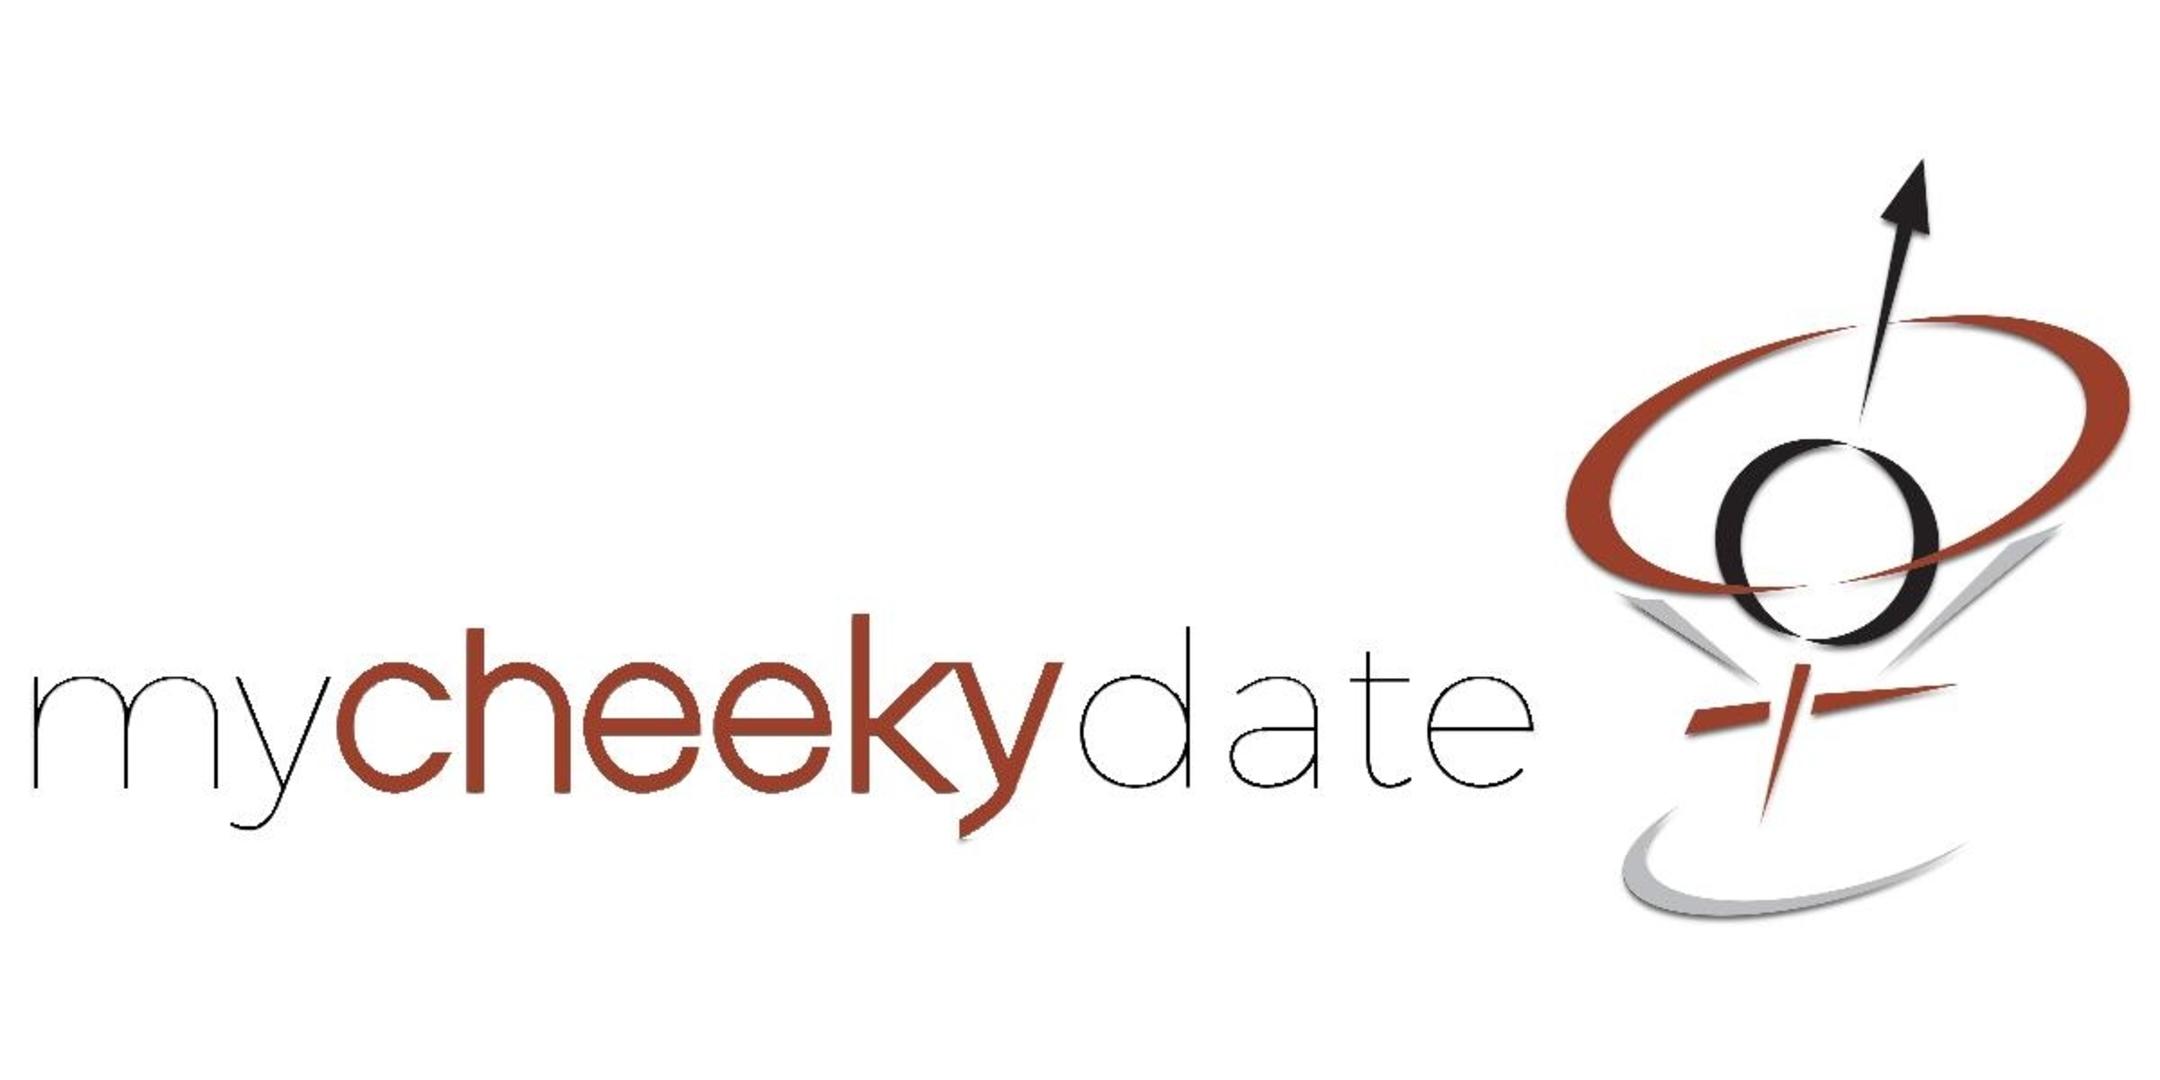 Speed Dating Houston | MyCheekyDate | Ages 26-38 | Saturday Night Event for Singles